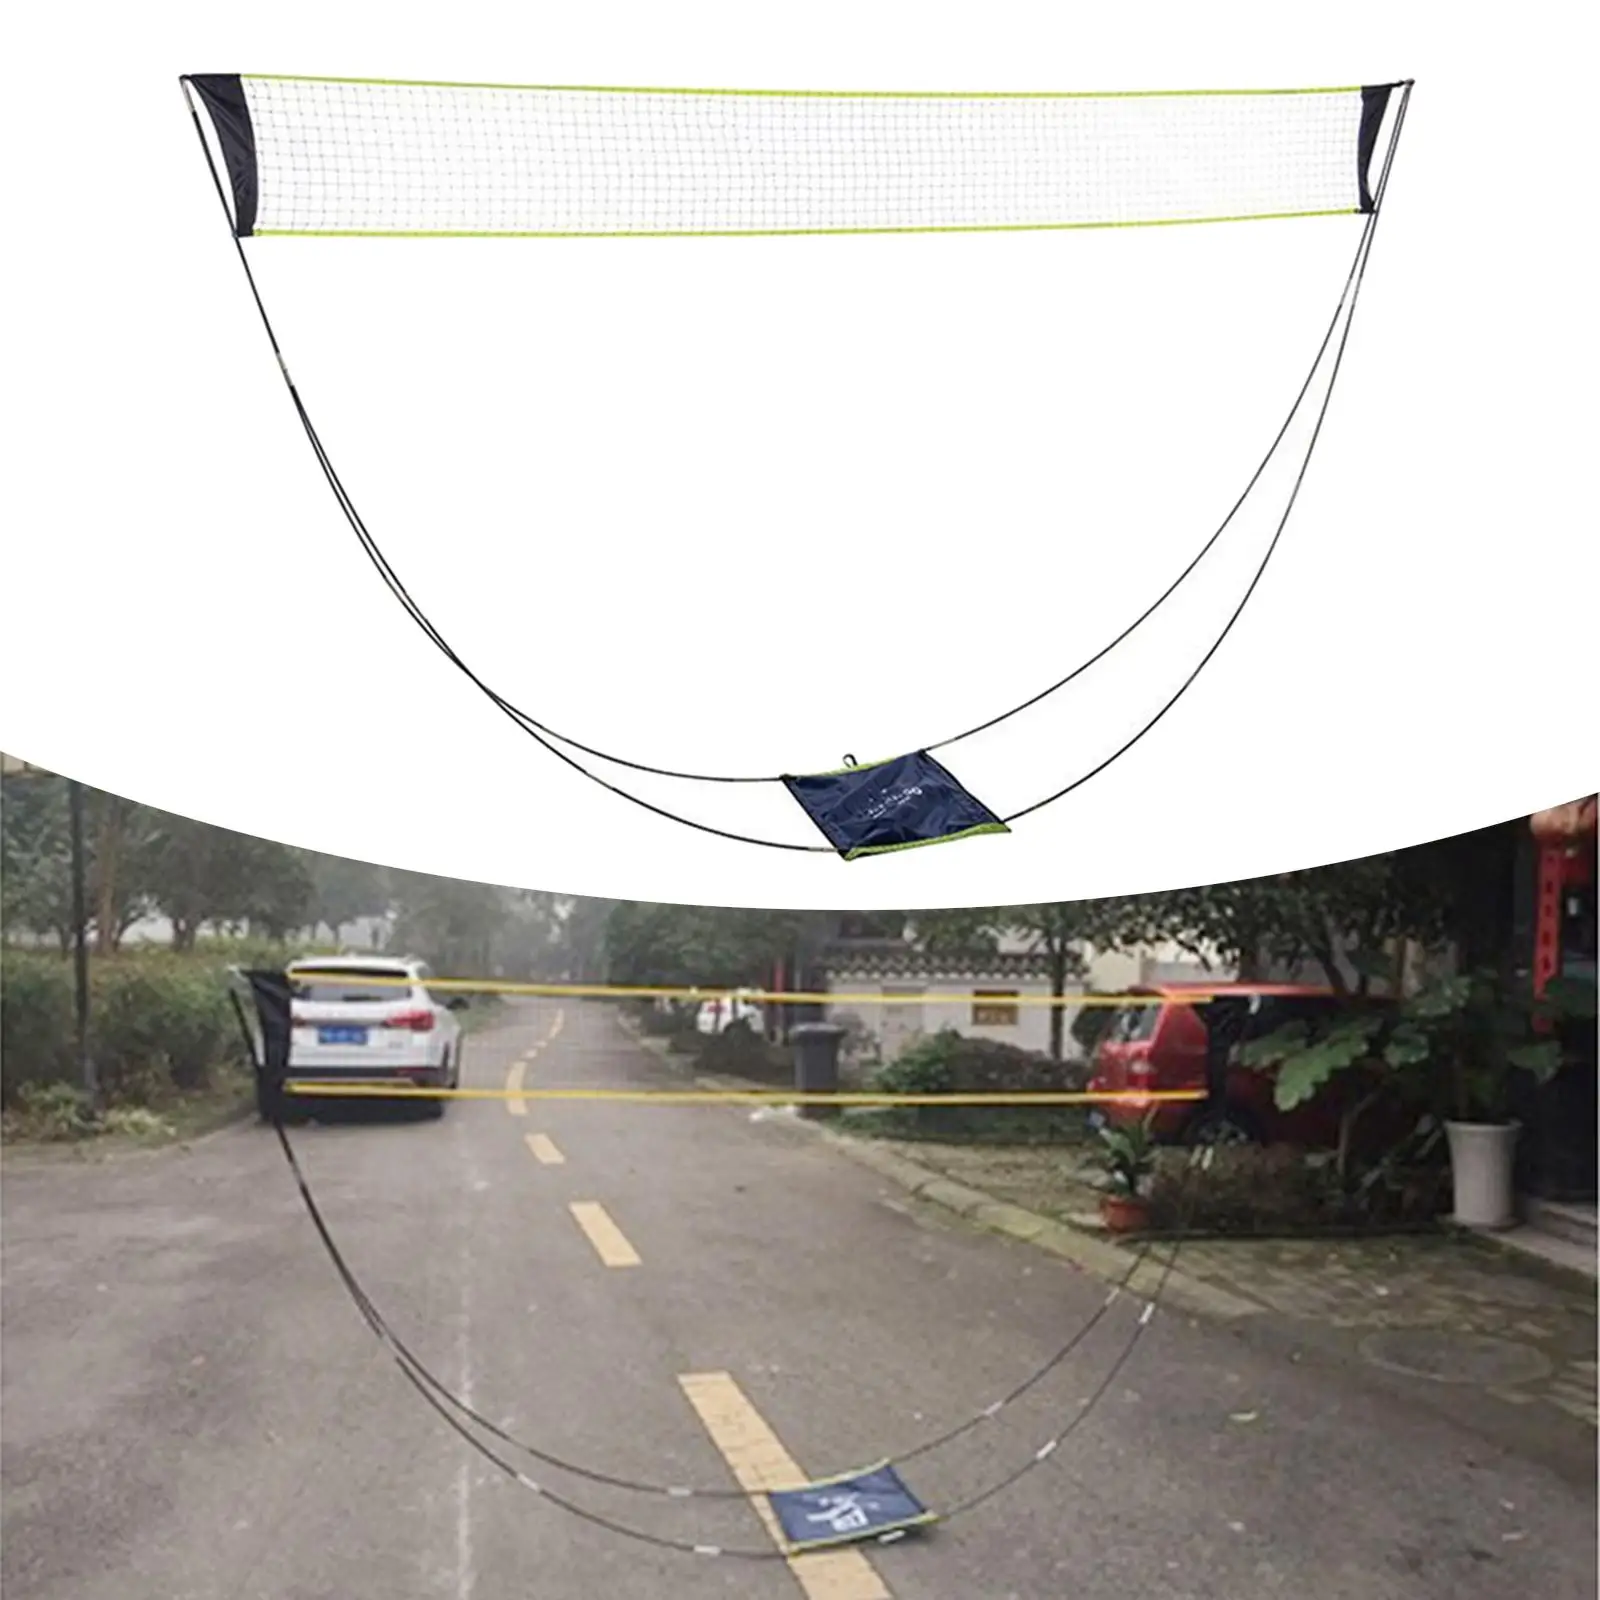 10x5 ft Portable Badminton Net Easy Setup for Volleyball Yard